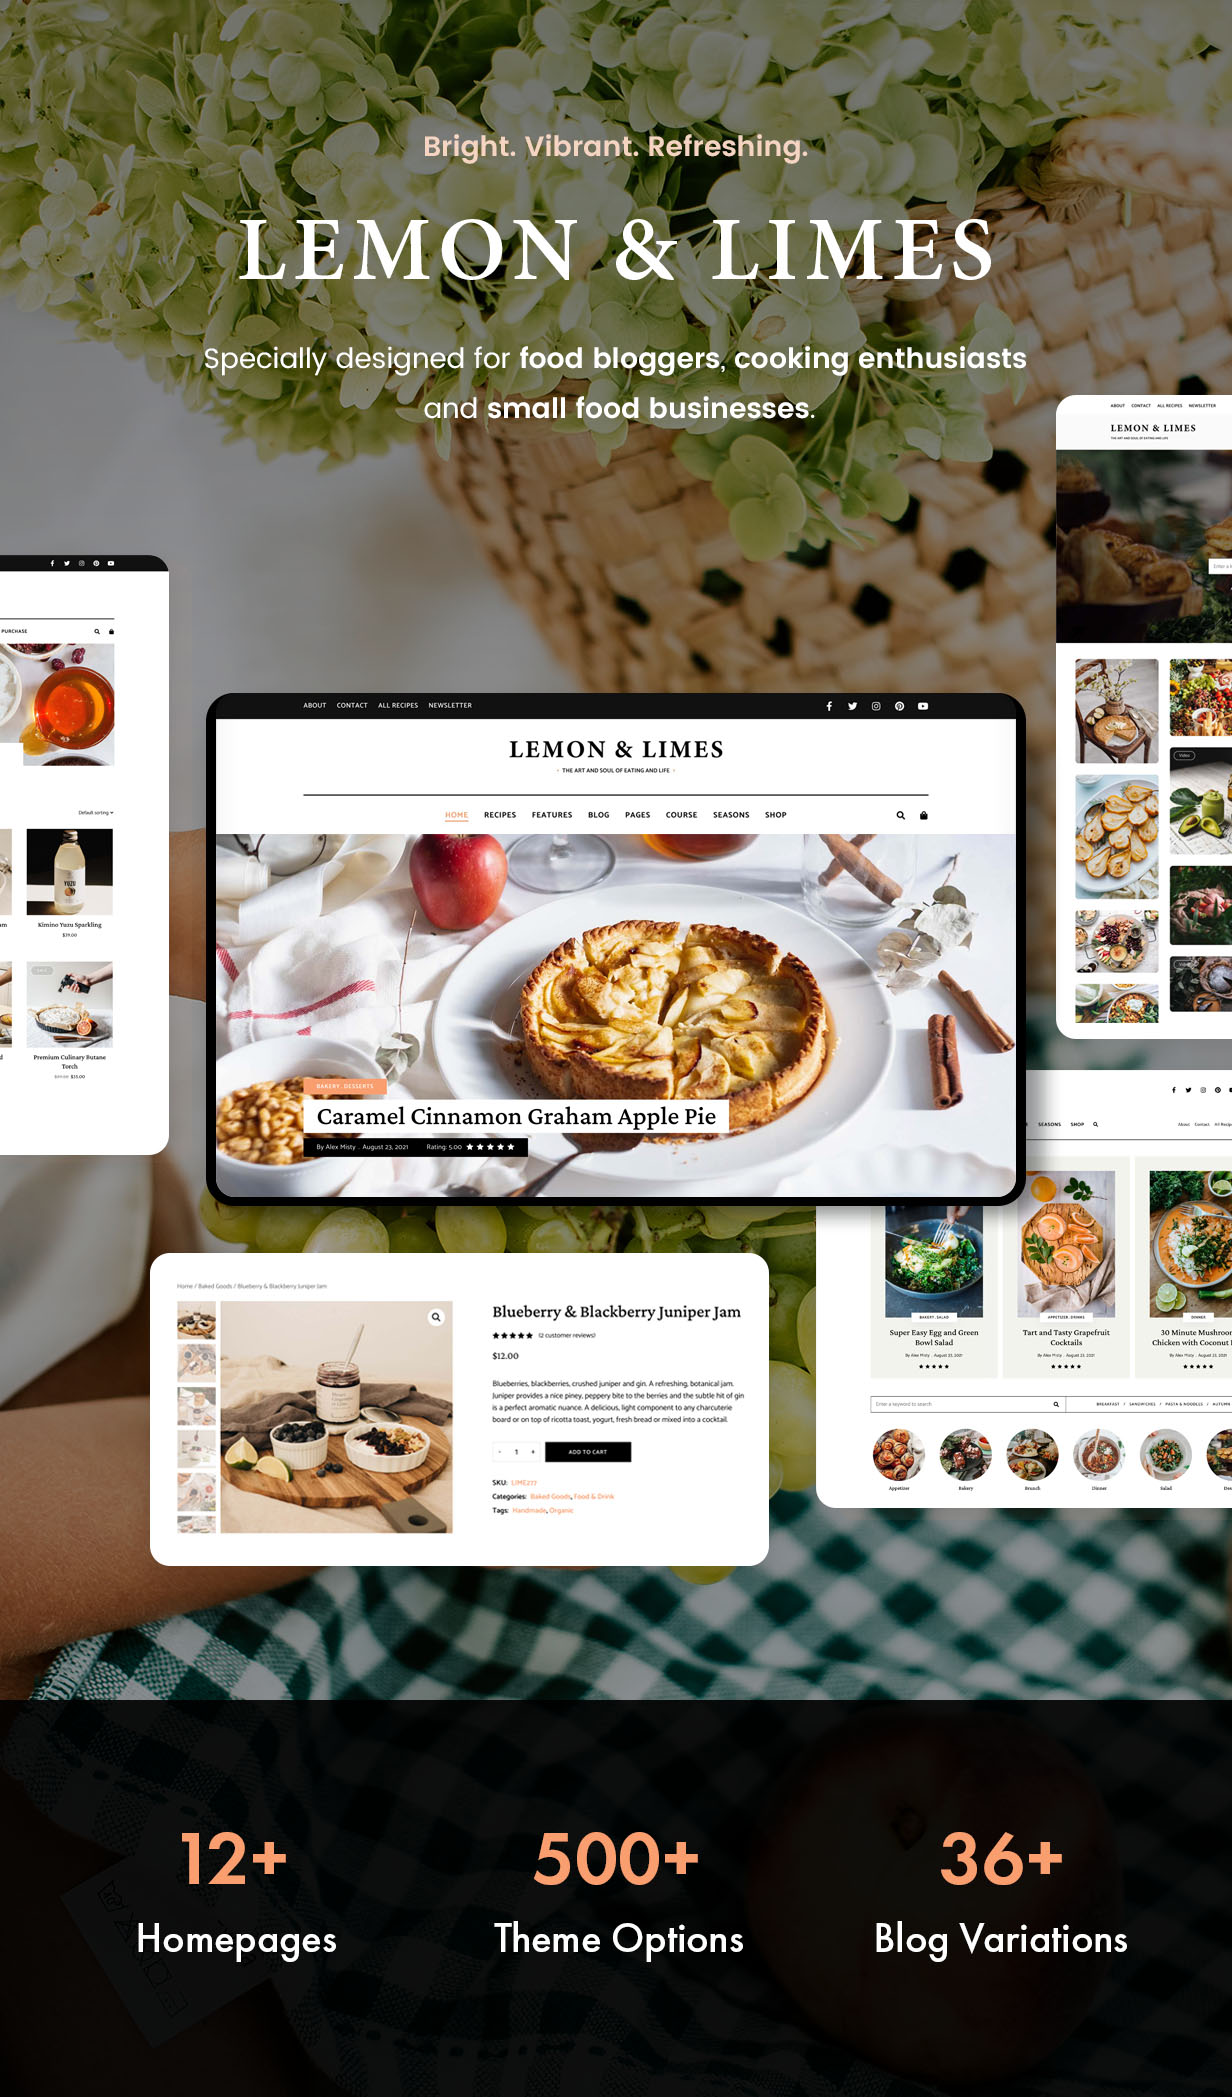 How to Start a Food Blog in 2022 (And Make Money)